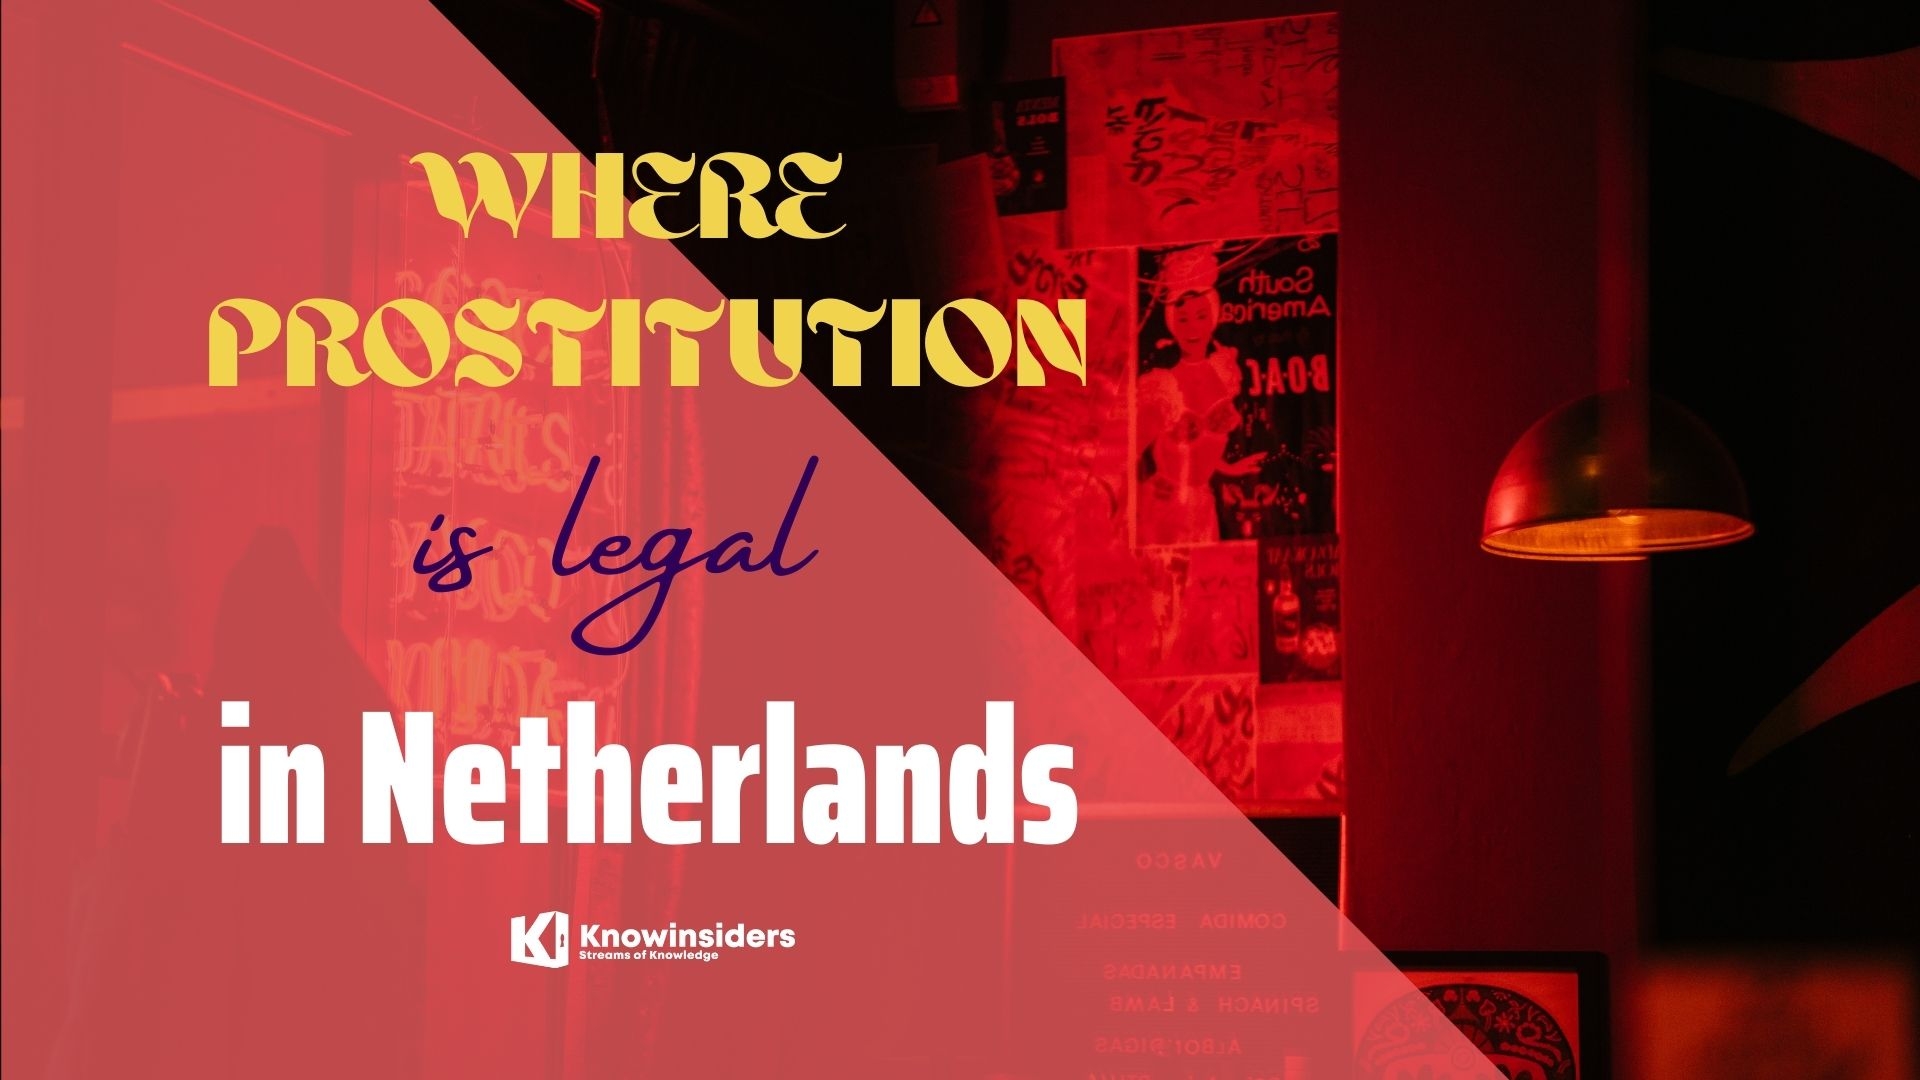 Where Prostitution Is Legal and Illegal In Netherlands